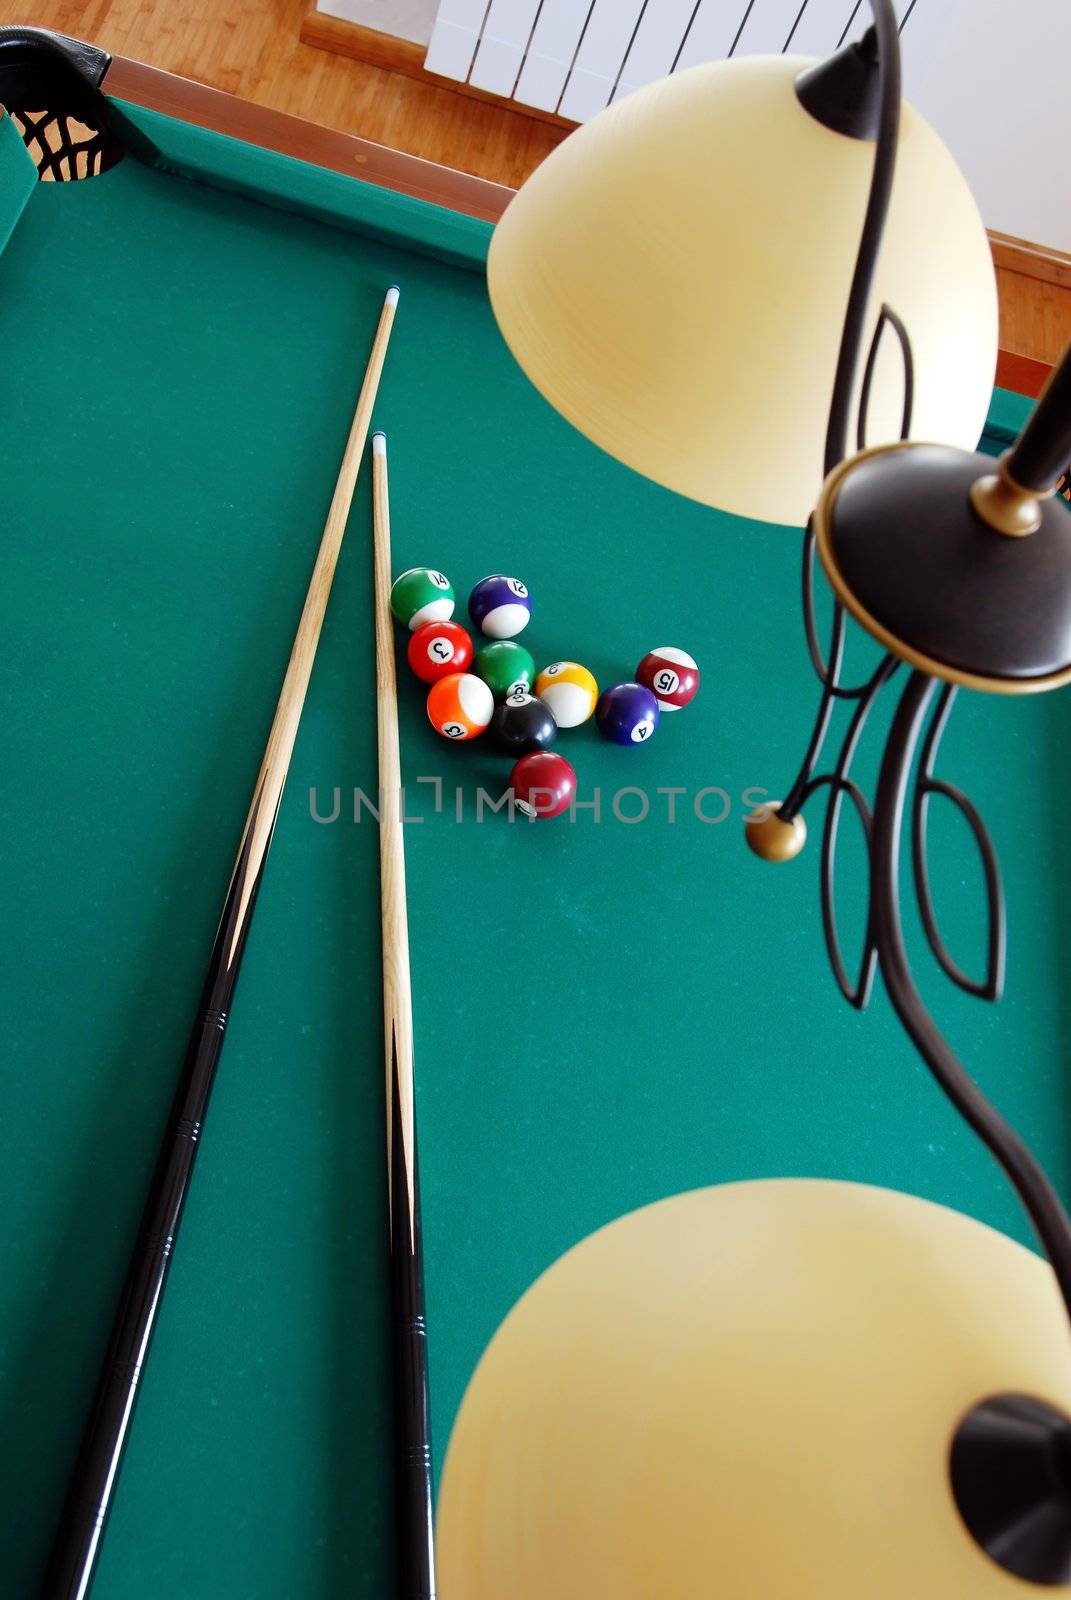 lamp over billiards green table with balls and two black cues